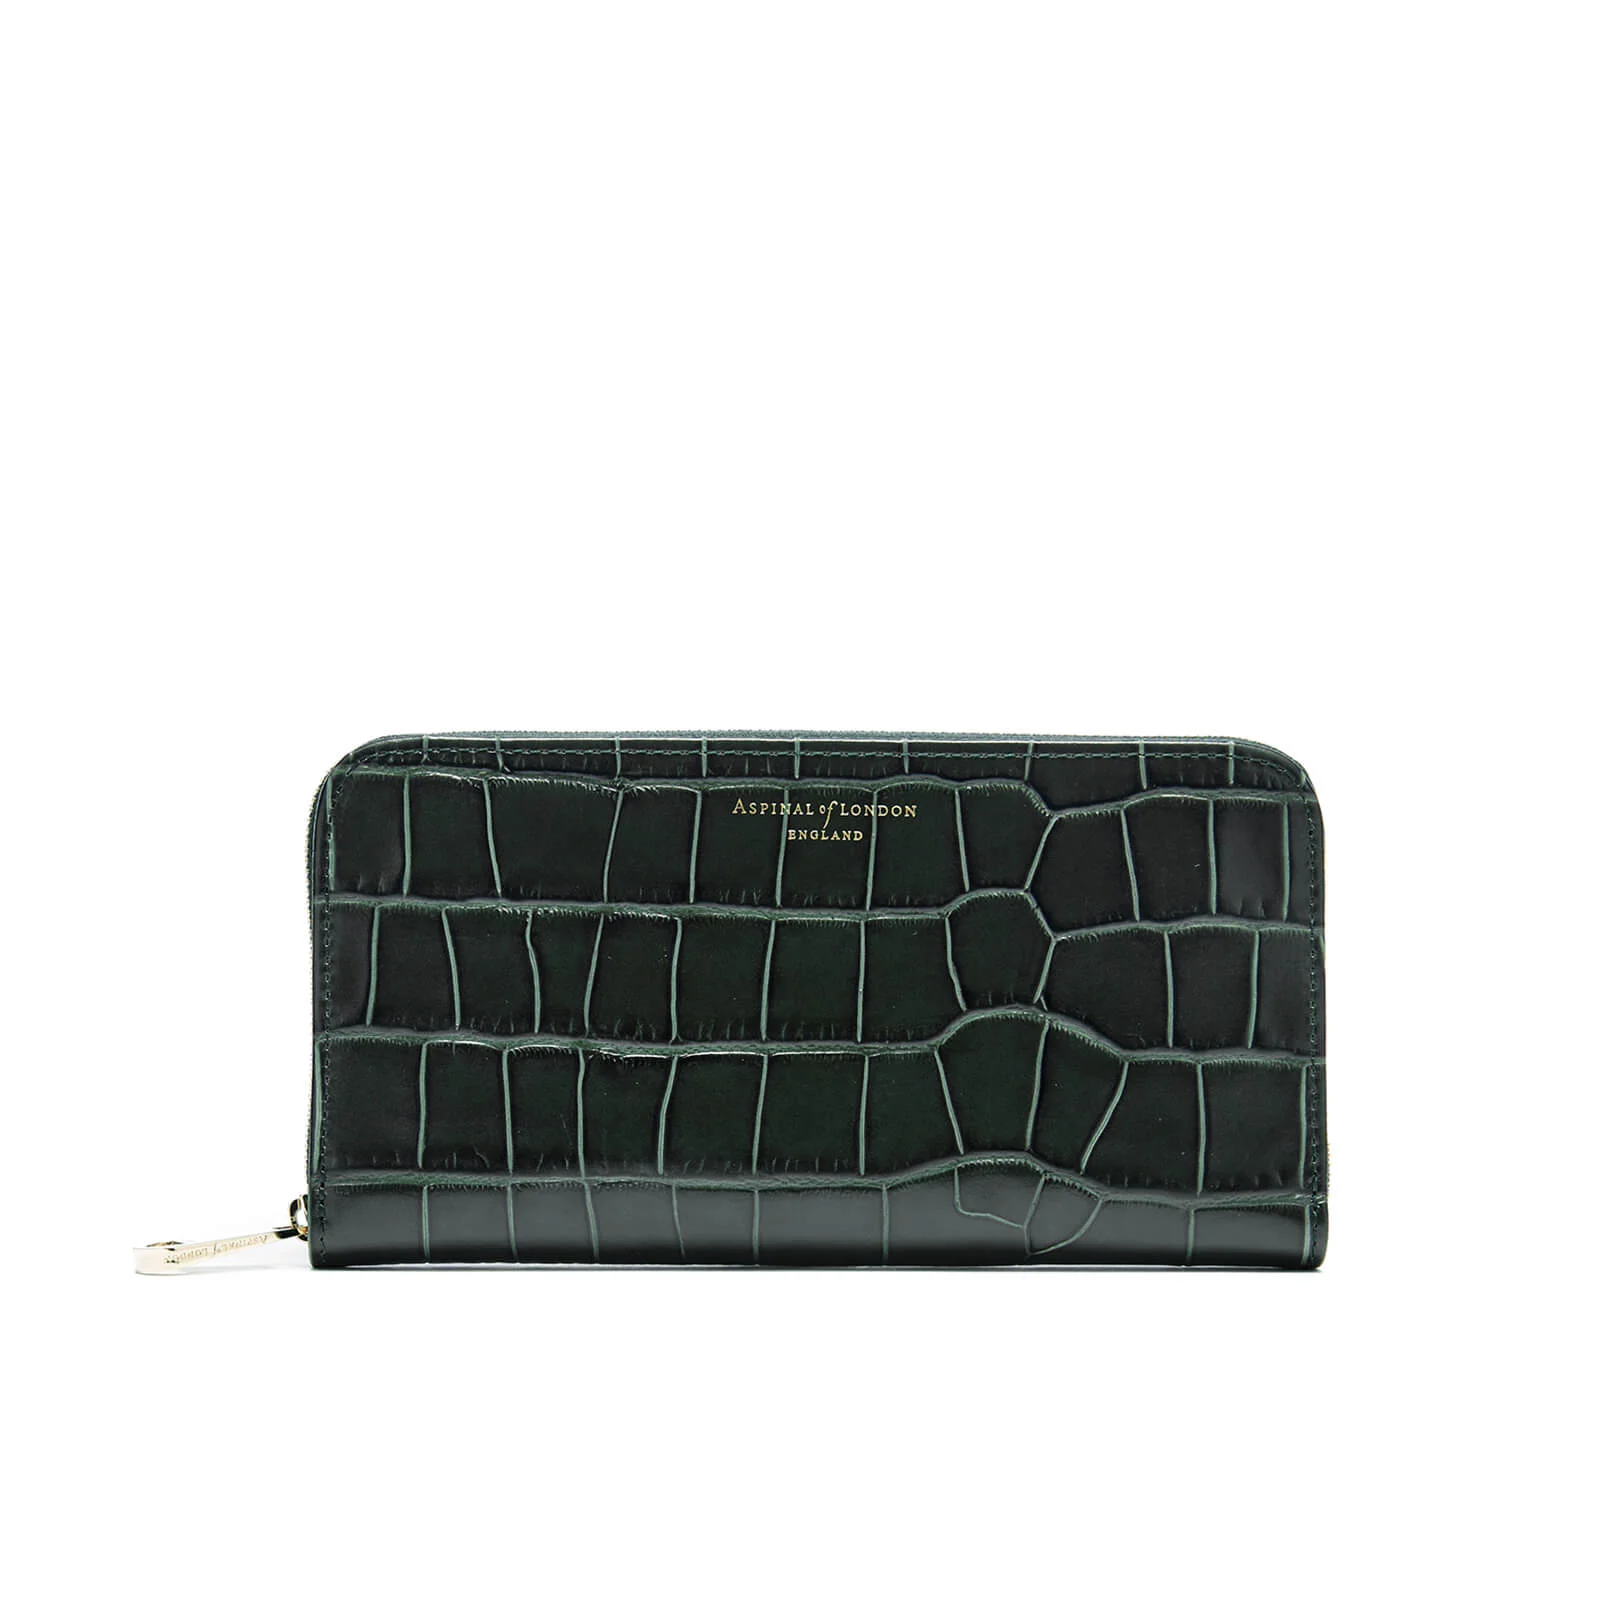 Aspinal of London Women's Continental Clutch Croc Purse - Forest Green Croc Image 1